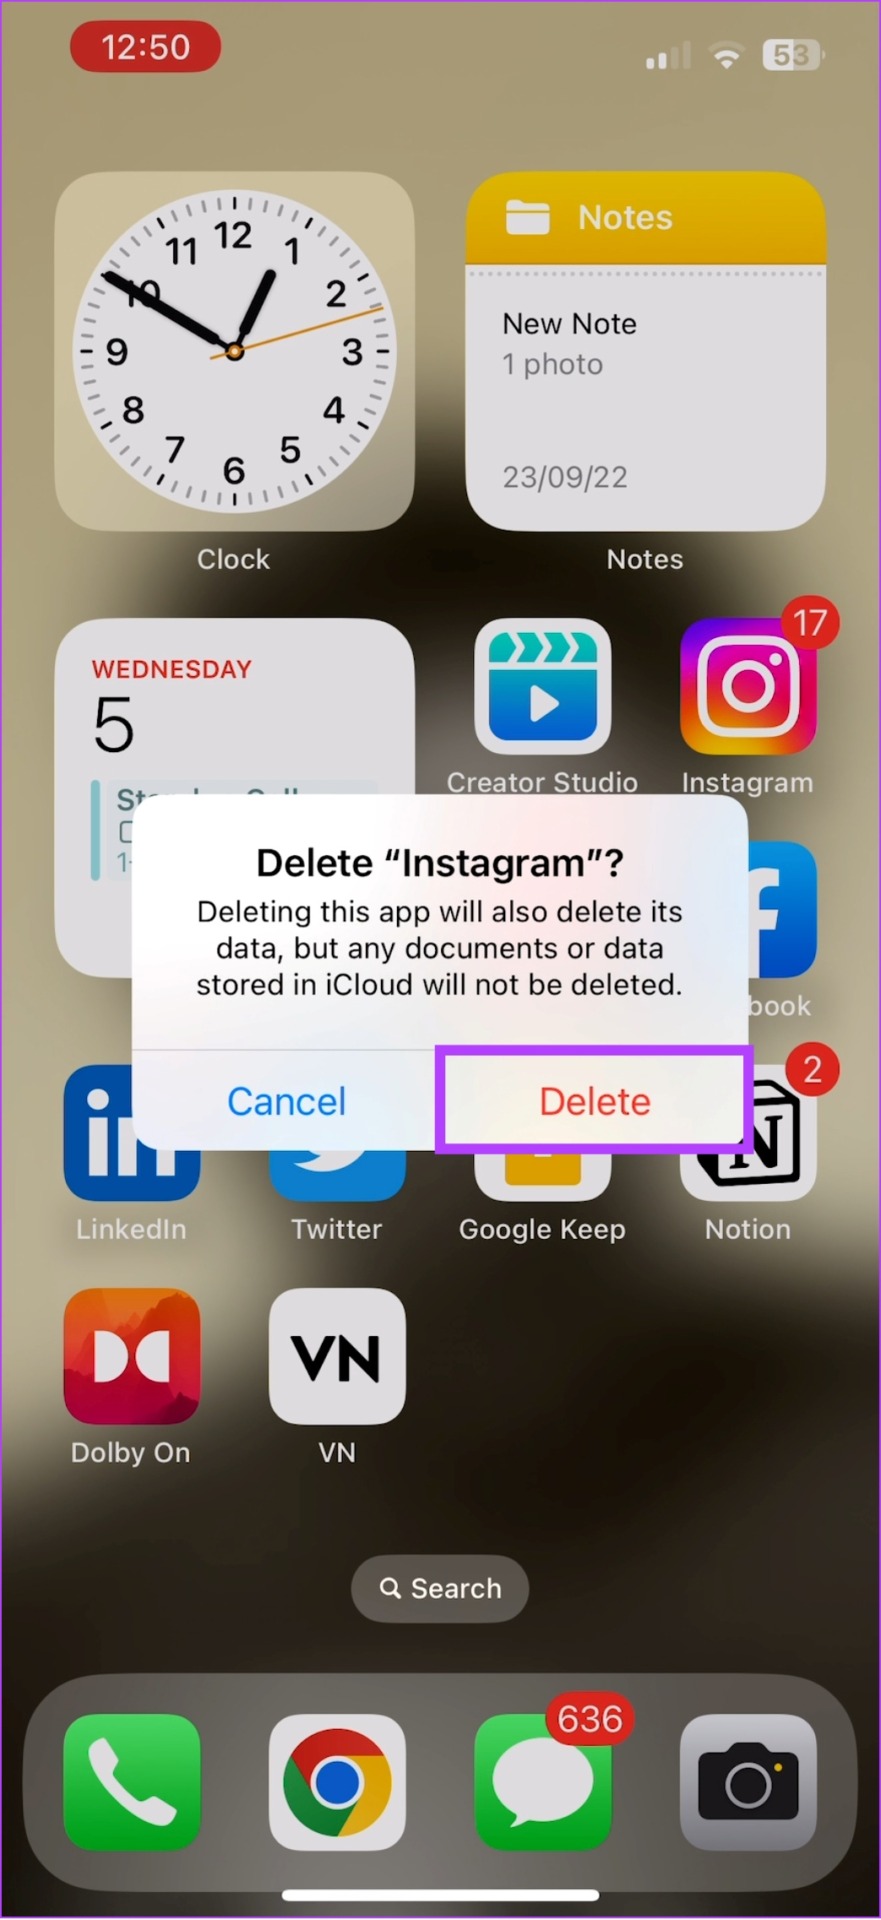 Choose delete again to confirm